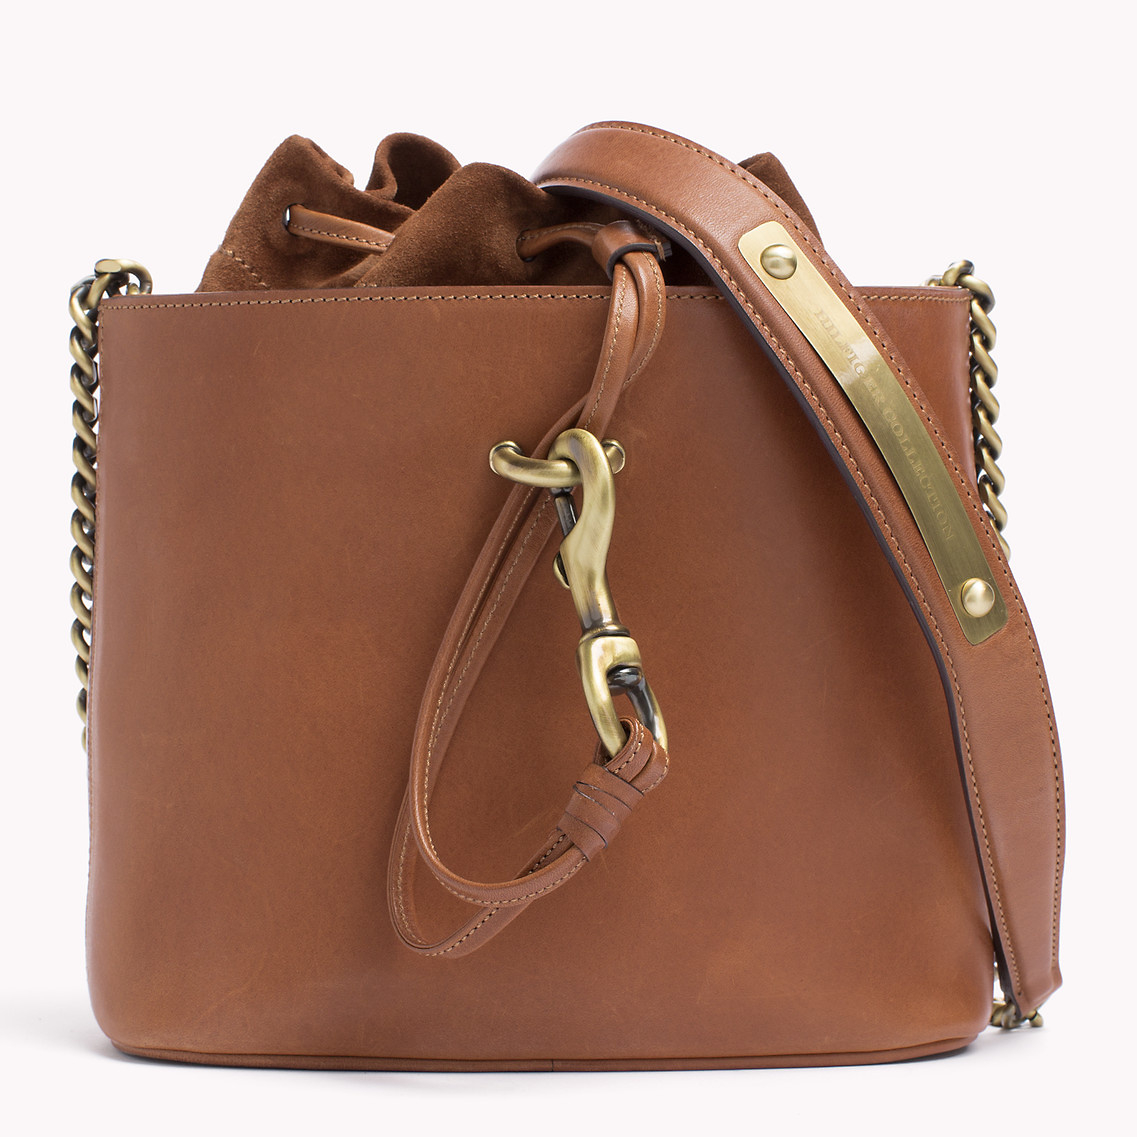 Tommy Hilfiger Small Bucket Bag in Brown - Lyst